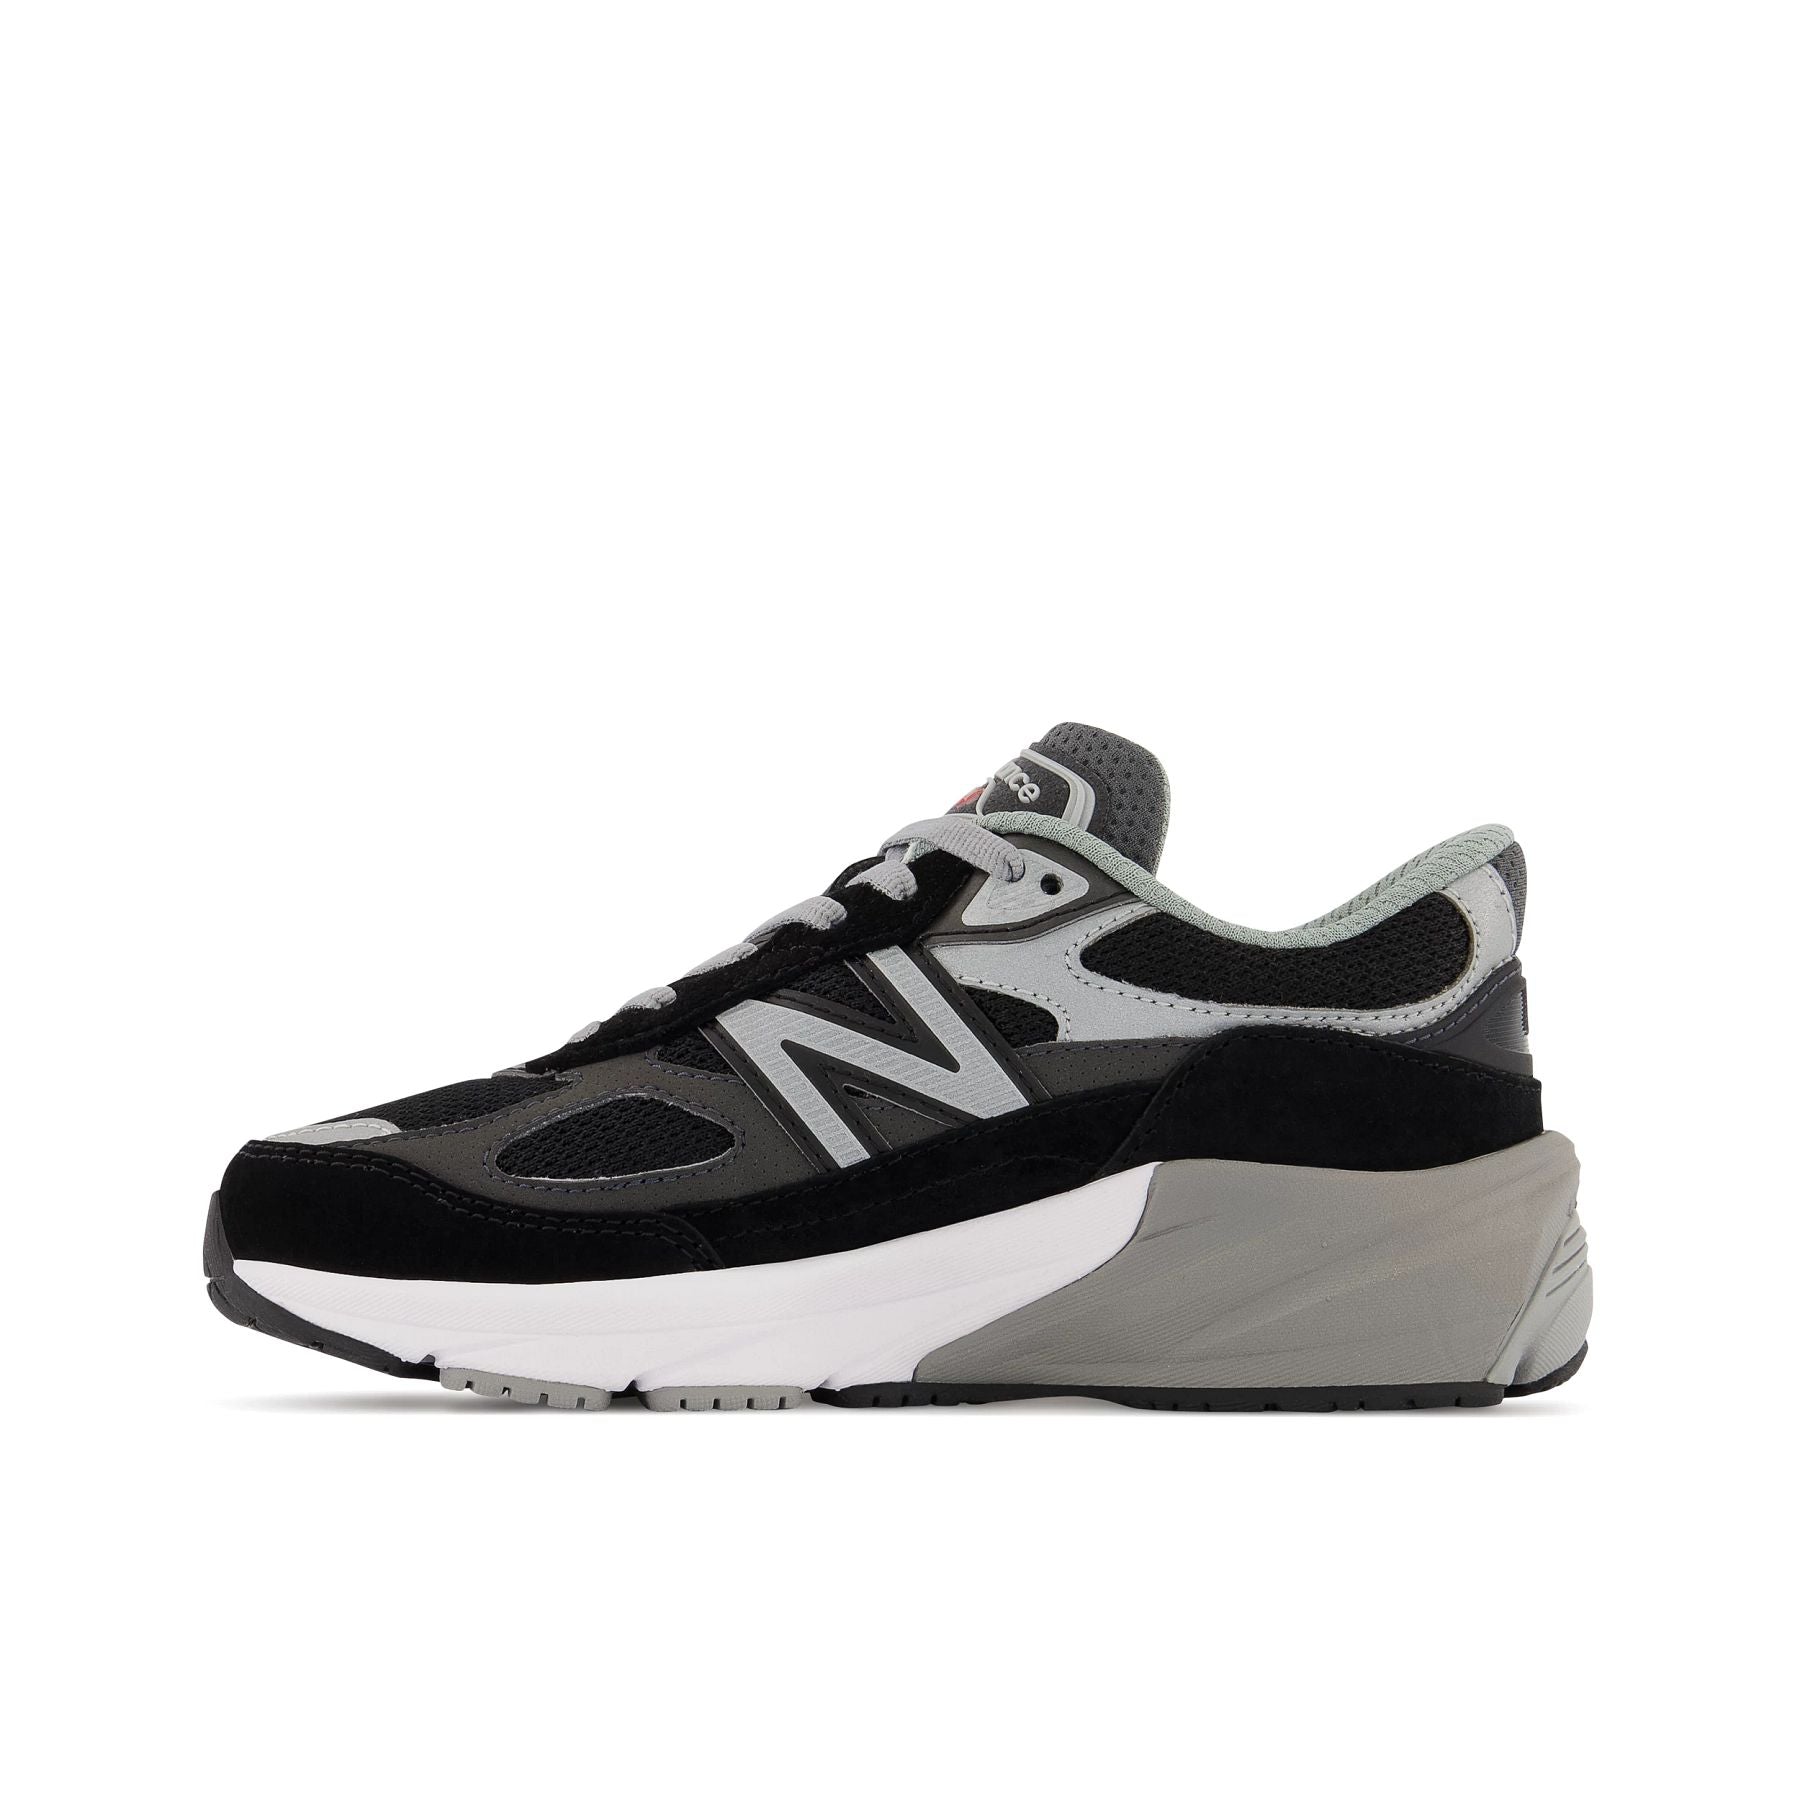 Medial view of the Kids New Balance 990 V6 in the color Black/Silver